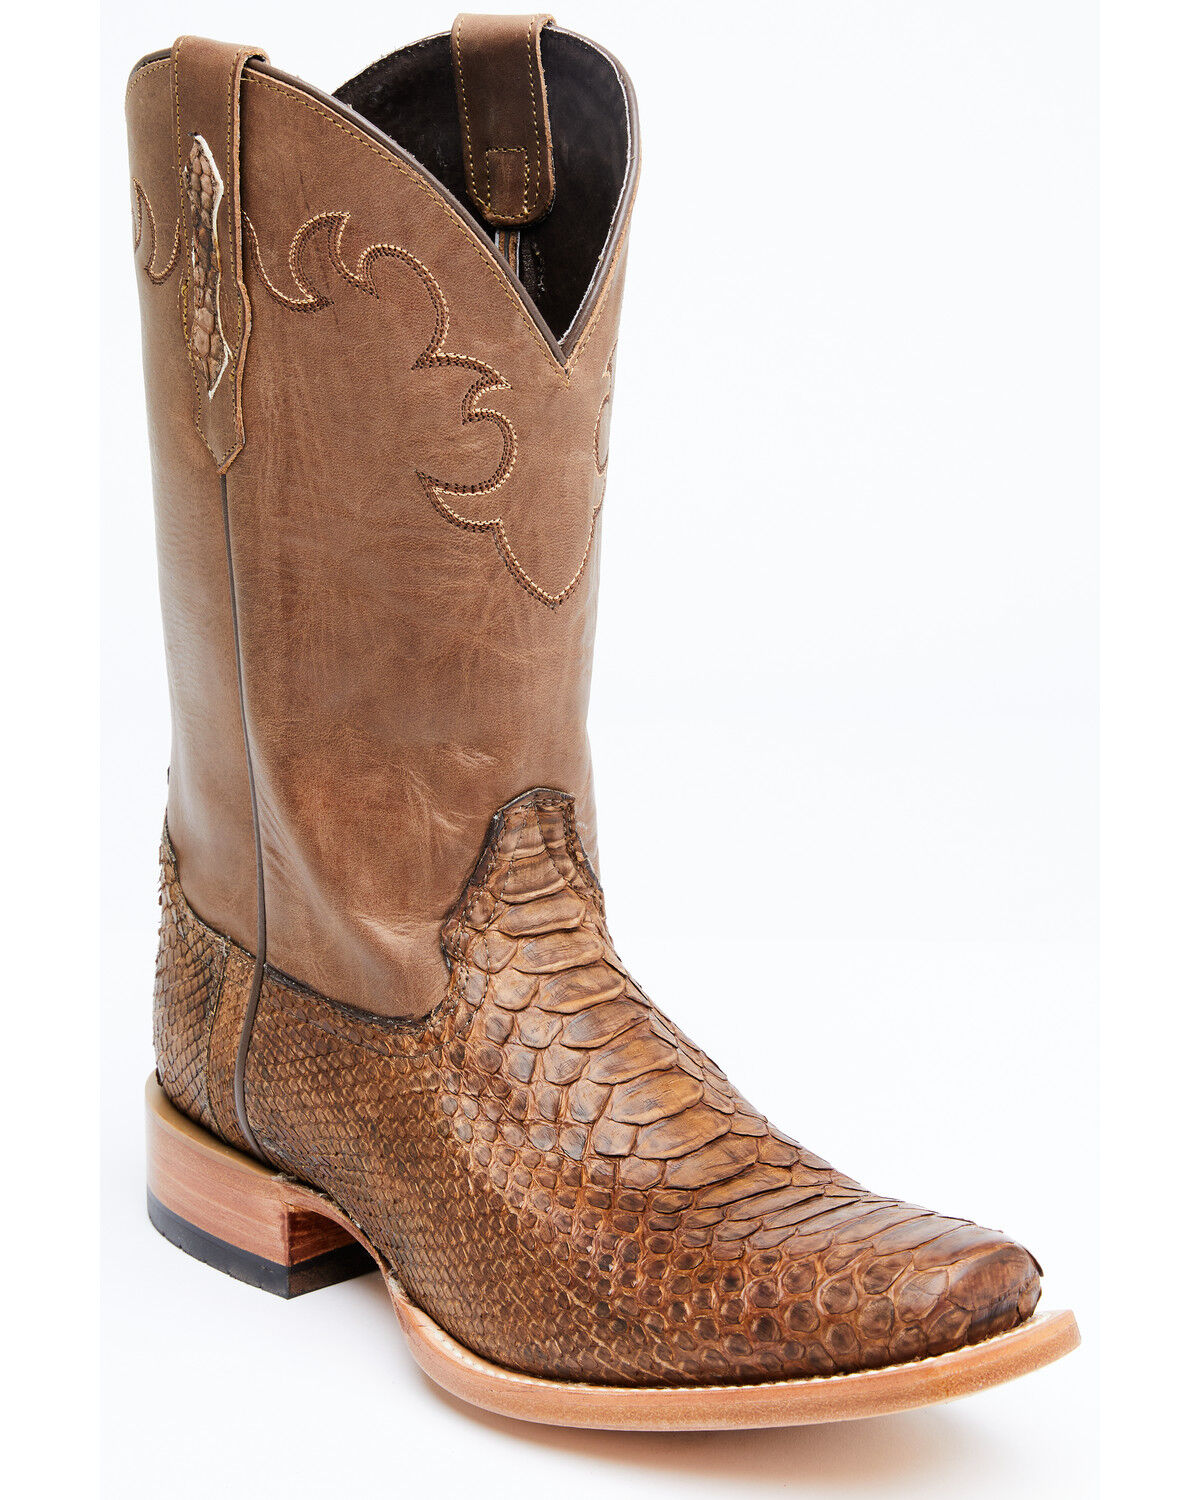 snakeskin cowgirl boots